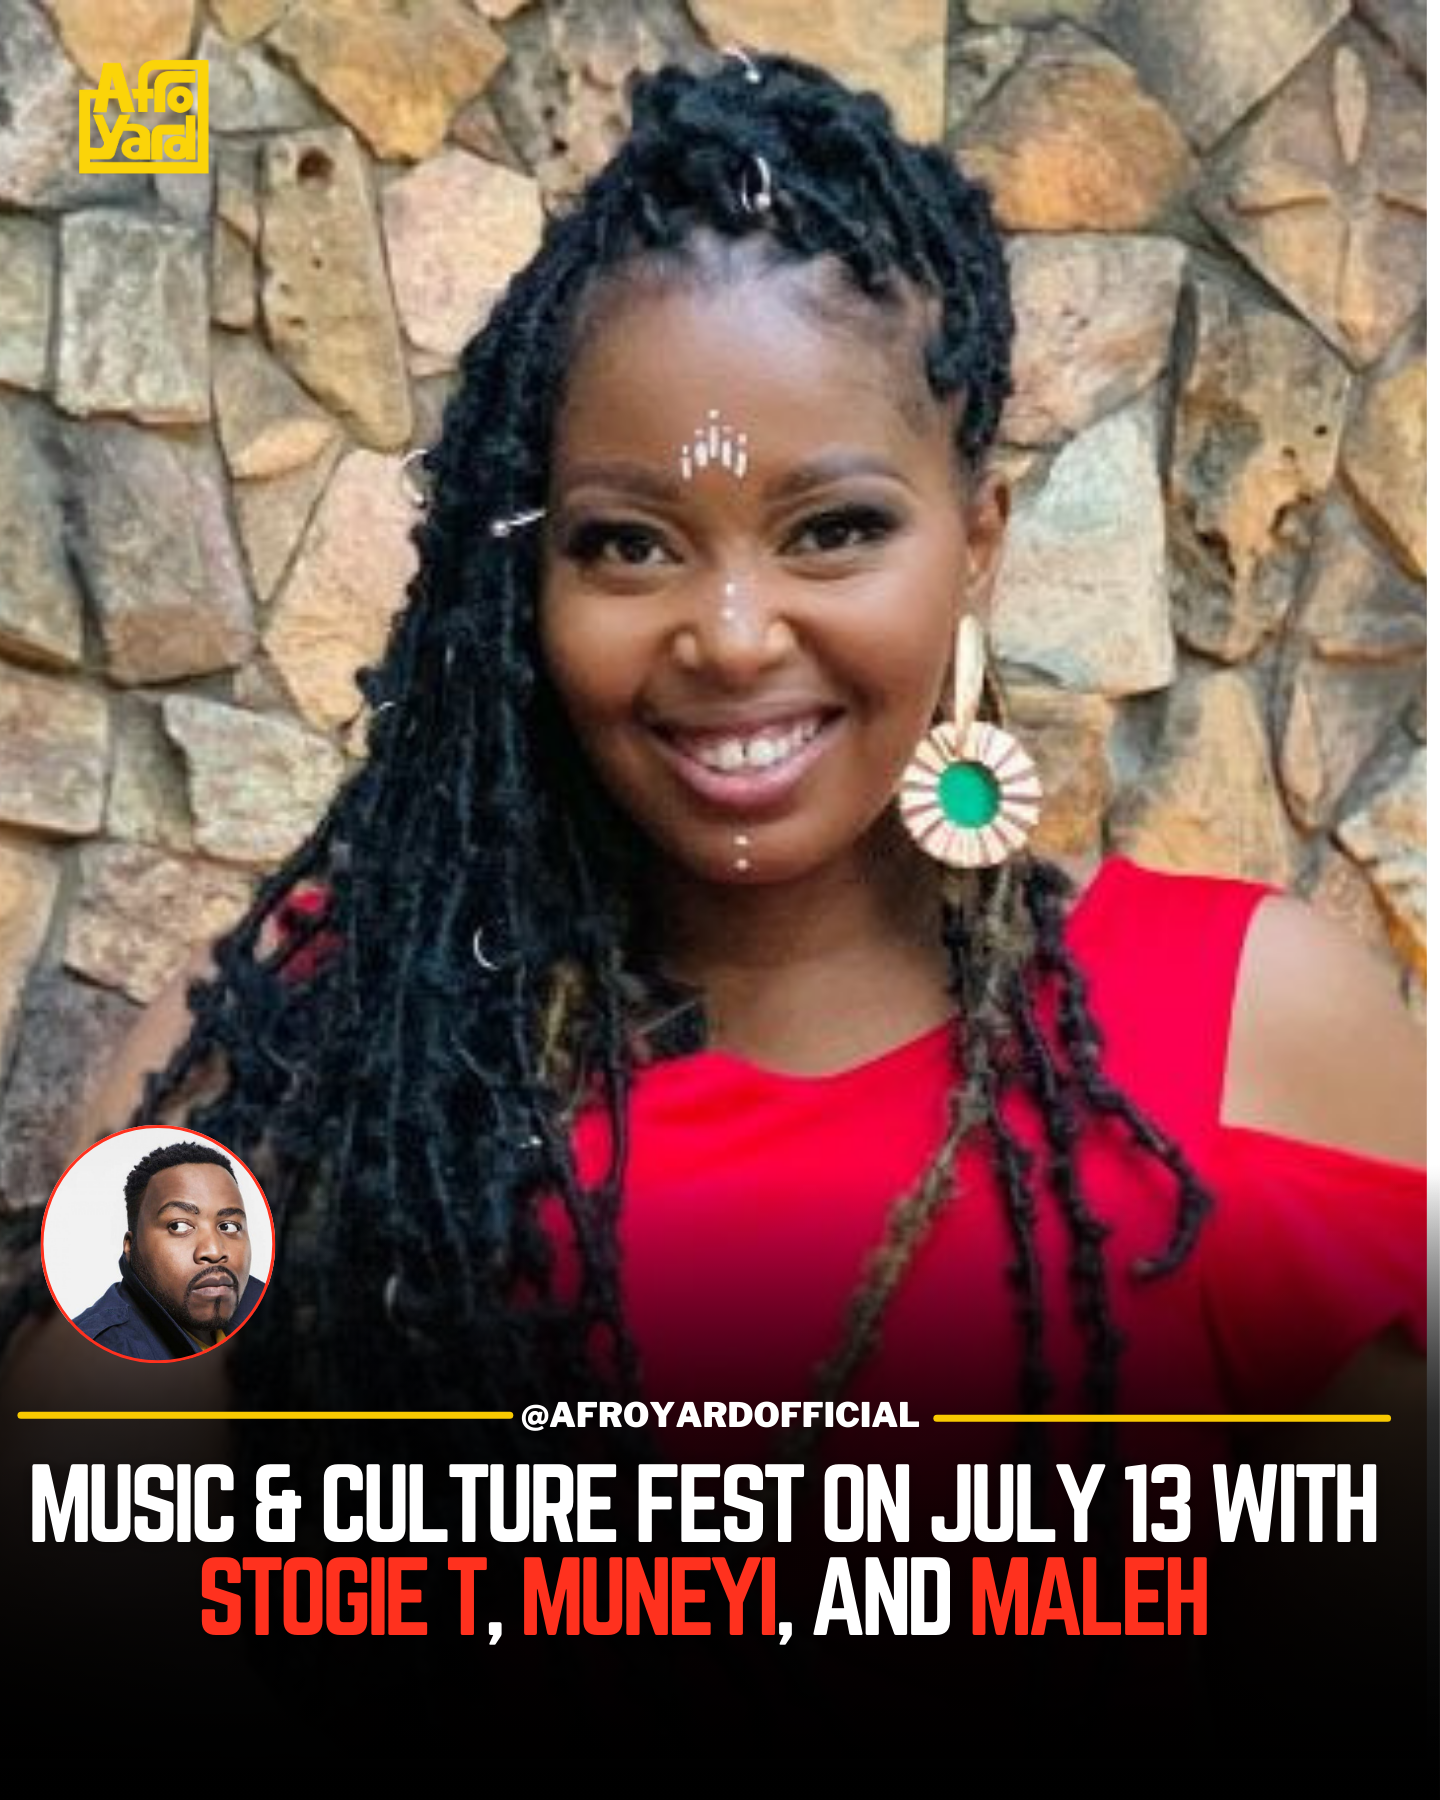 Music & Culture Fest on July 13 with Stogie T, Muneyi, and Maleh